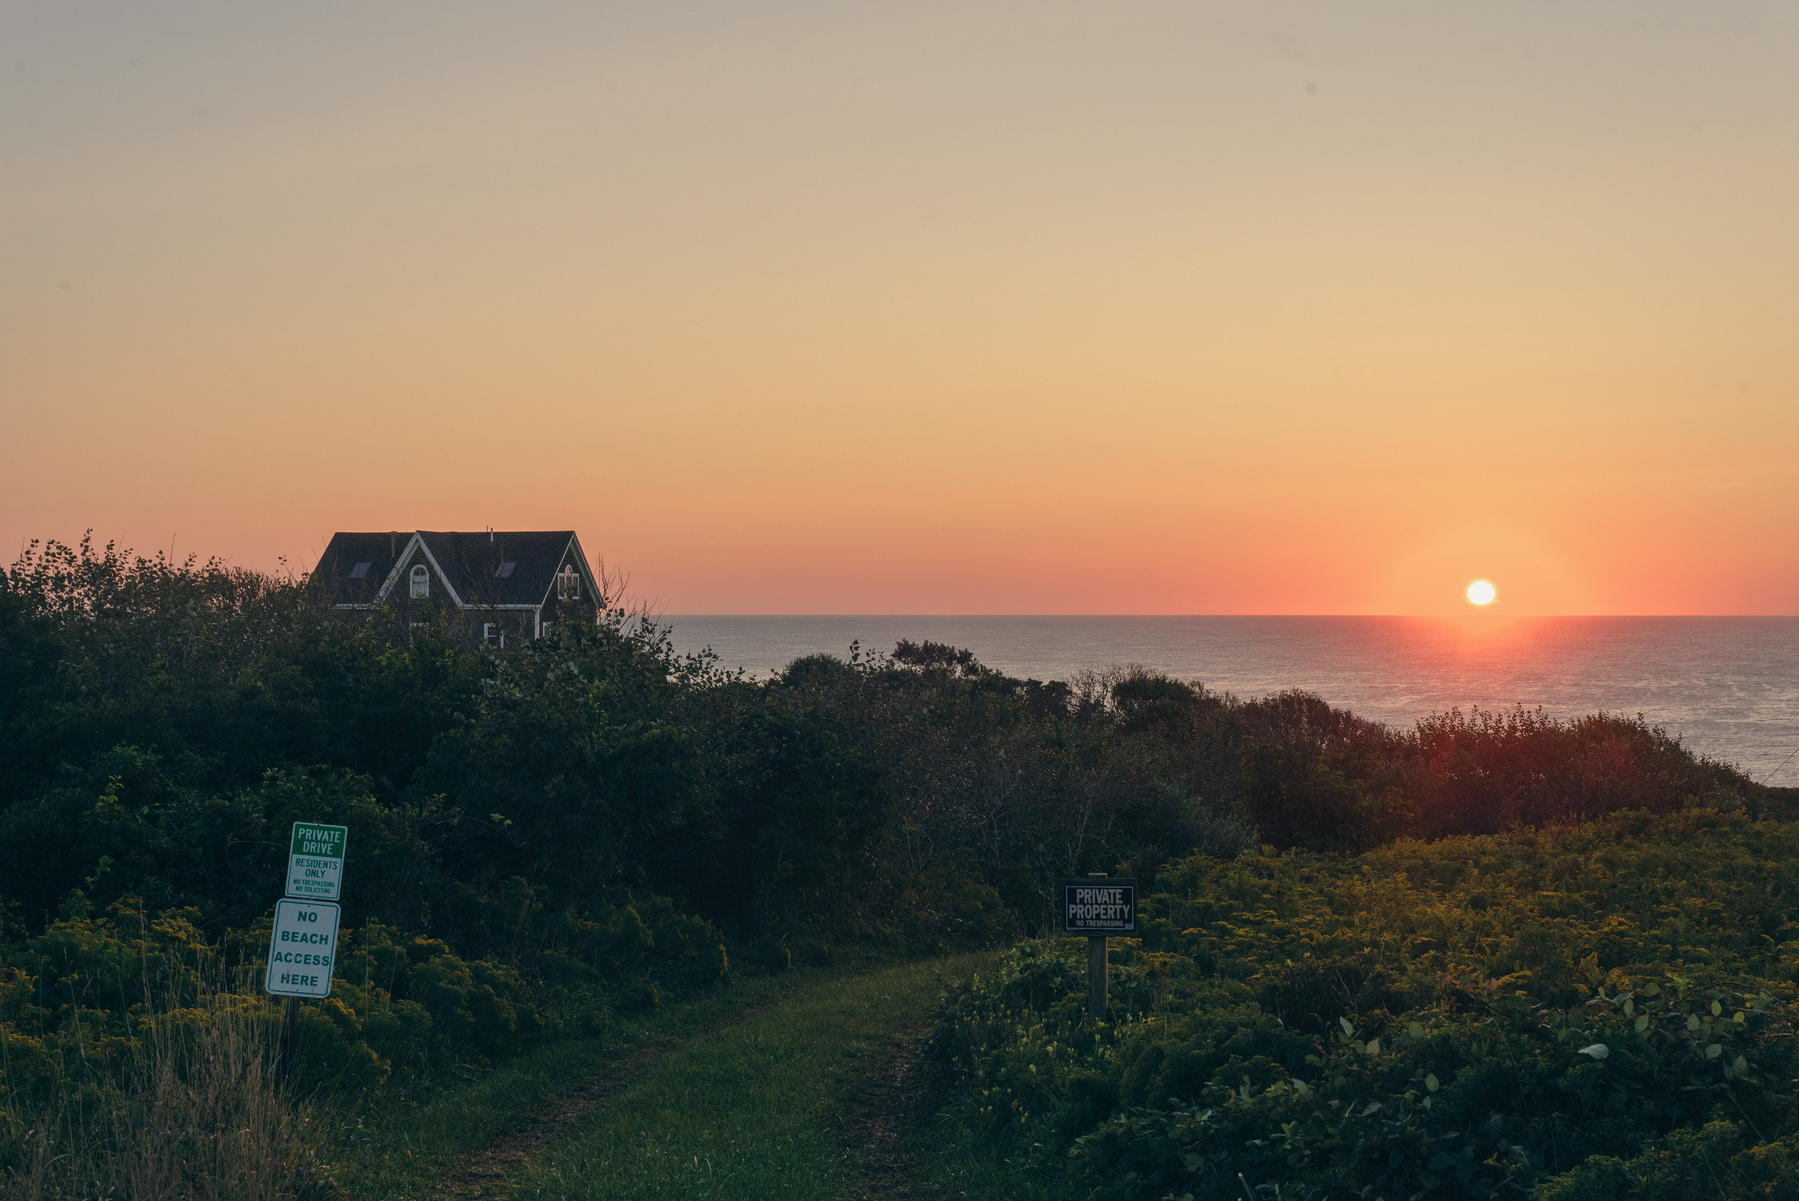 Landscape with house and ocean in the distance. Sun coming up.